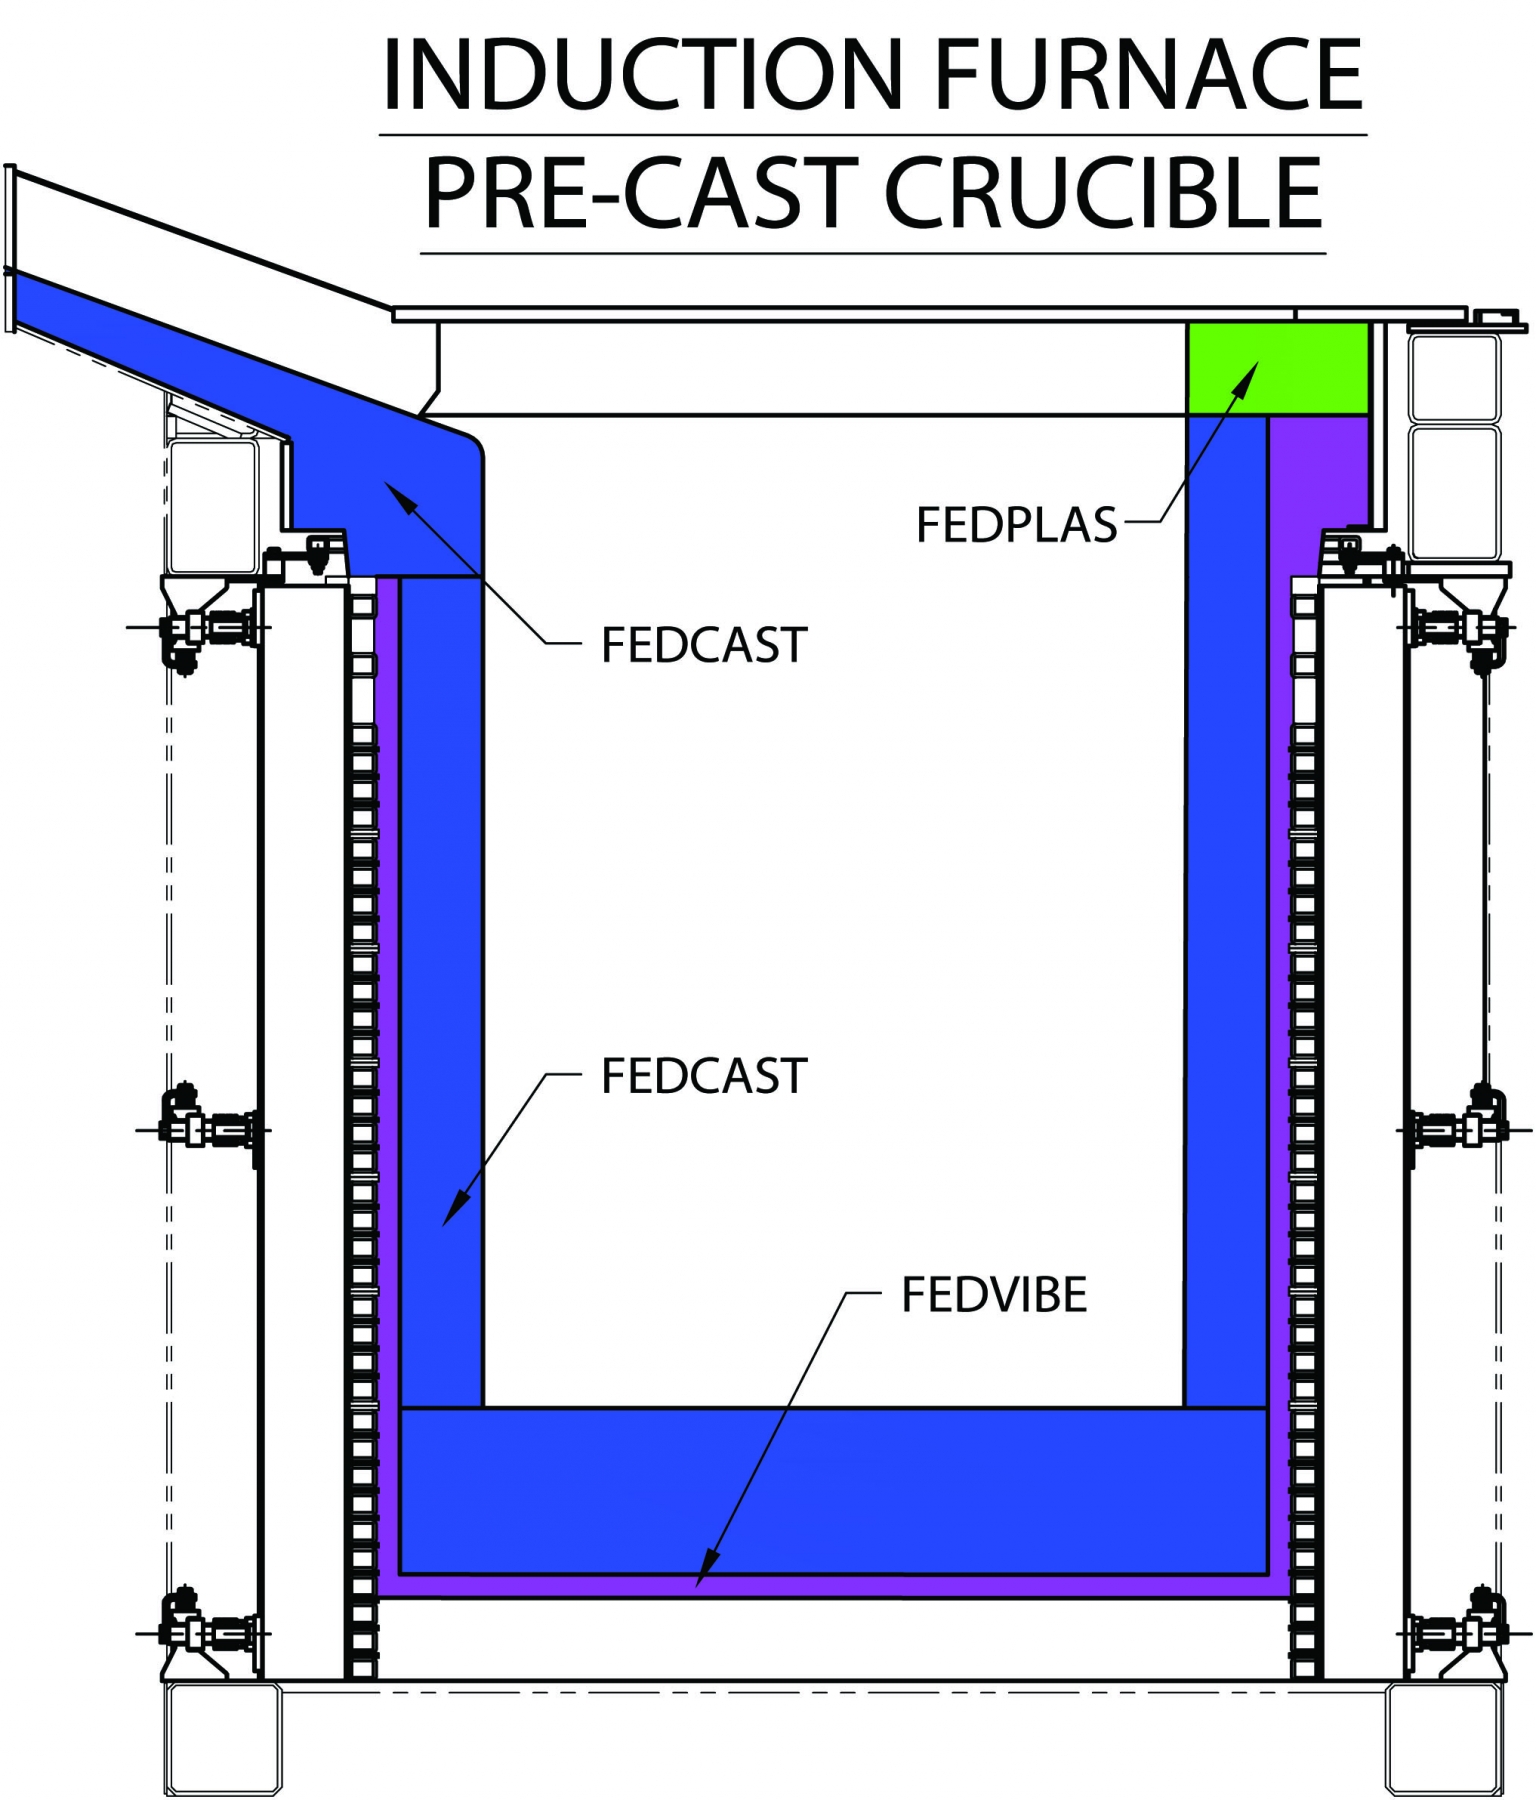 diagram showing induction furnace pre-cast crucible